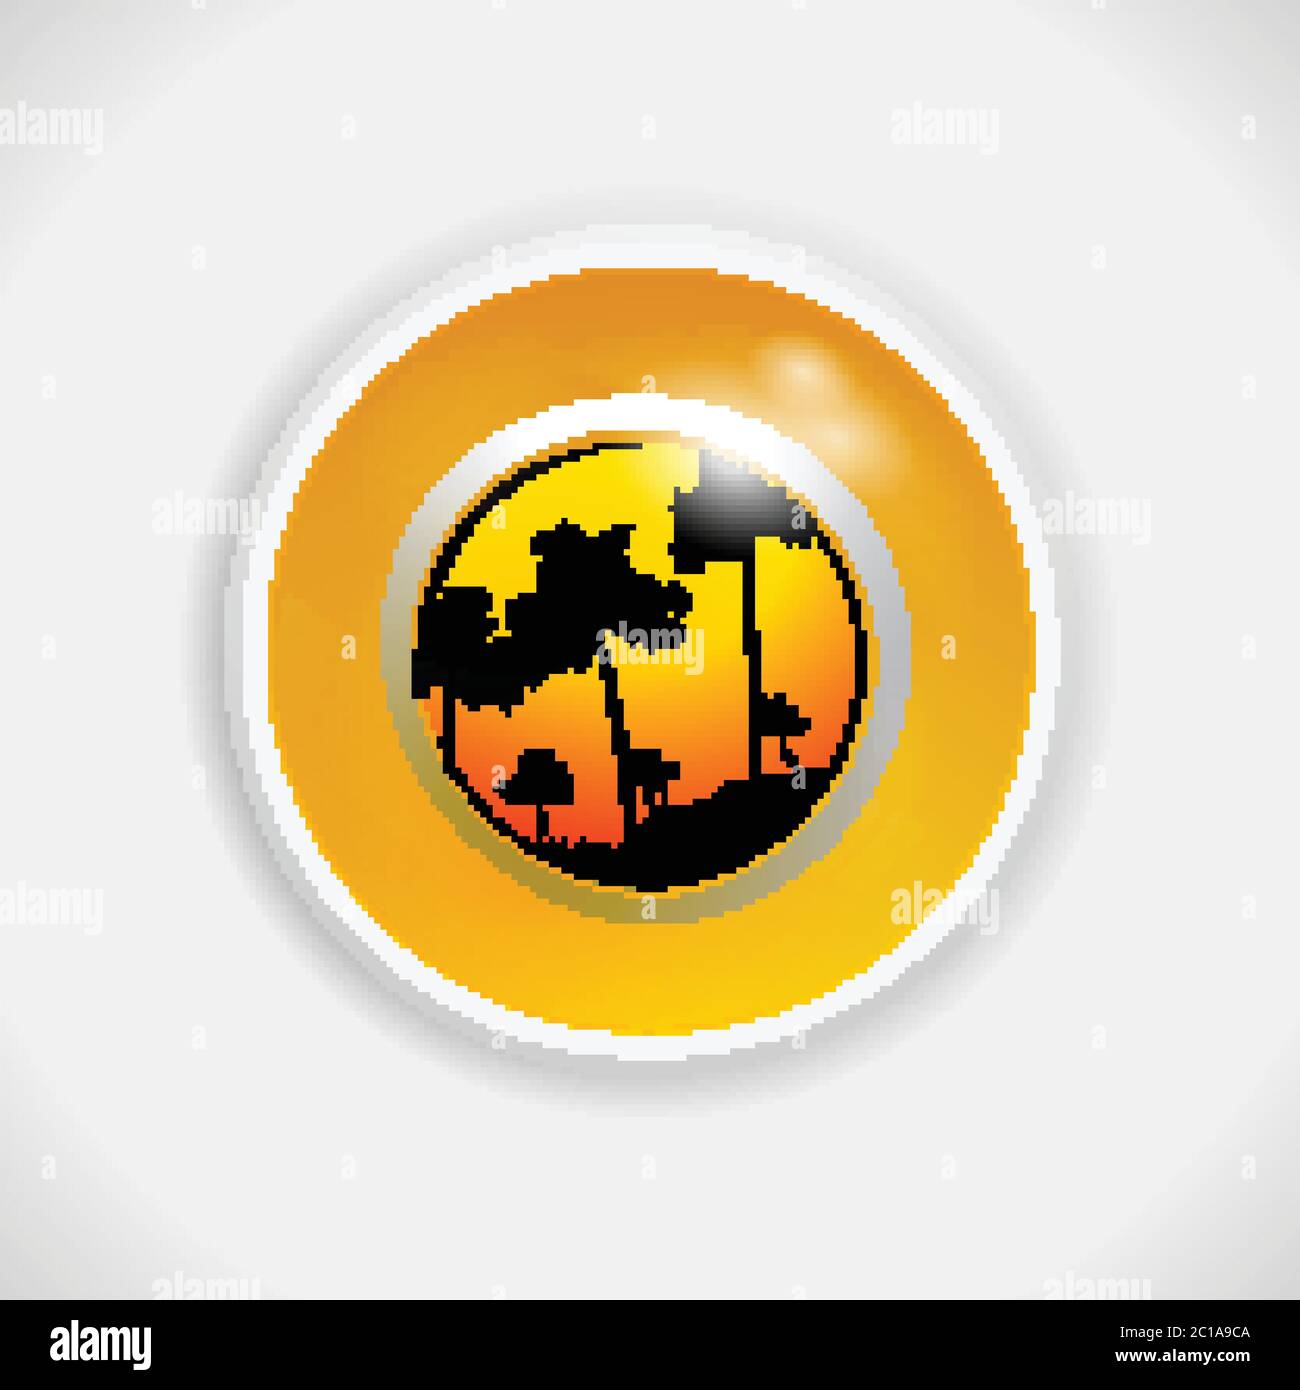 3D Illustration Of A Yellow Bingo Lottery Ball With Tropical Summer Scene Of Palm Trees Silhouette Instead Of The Number Over White Background Stock Vector